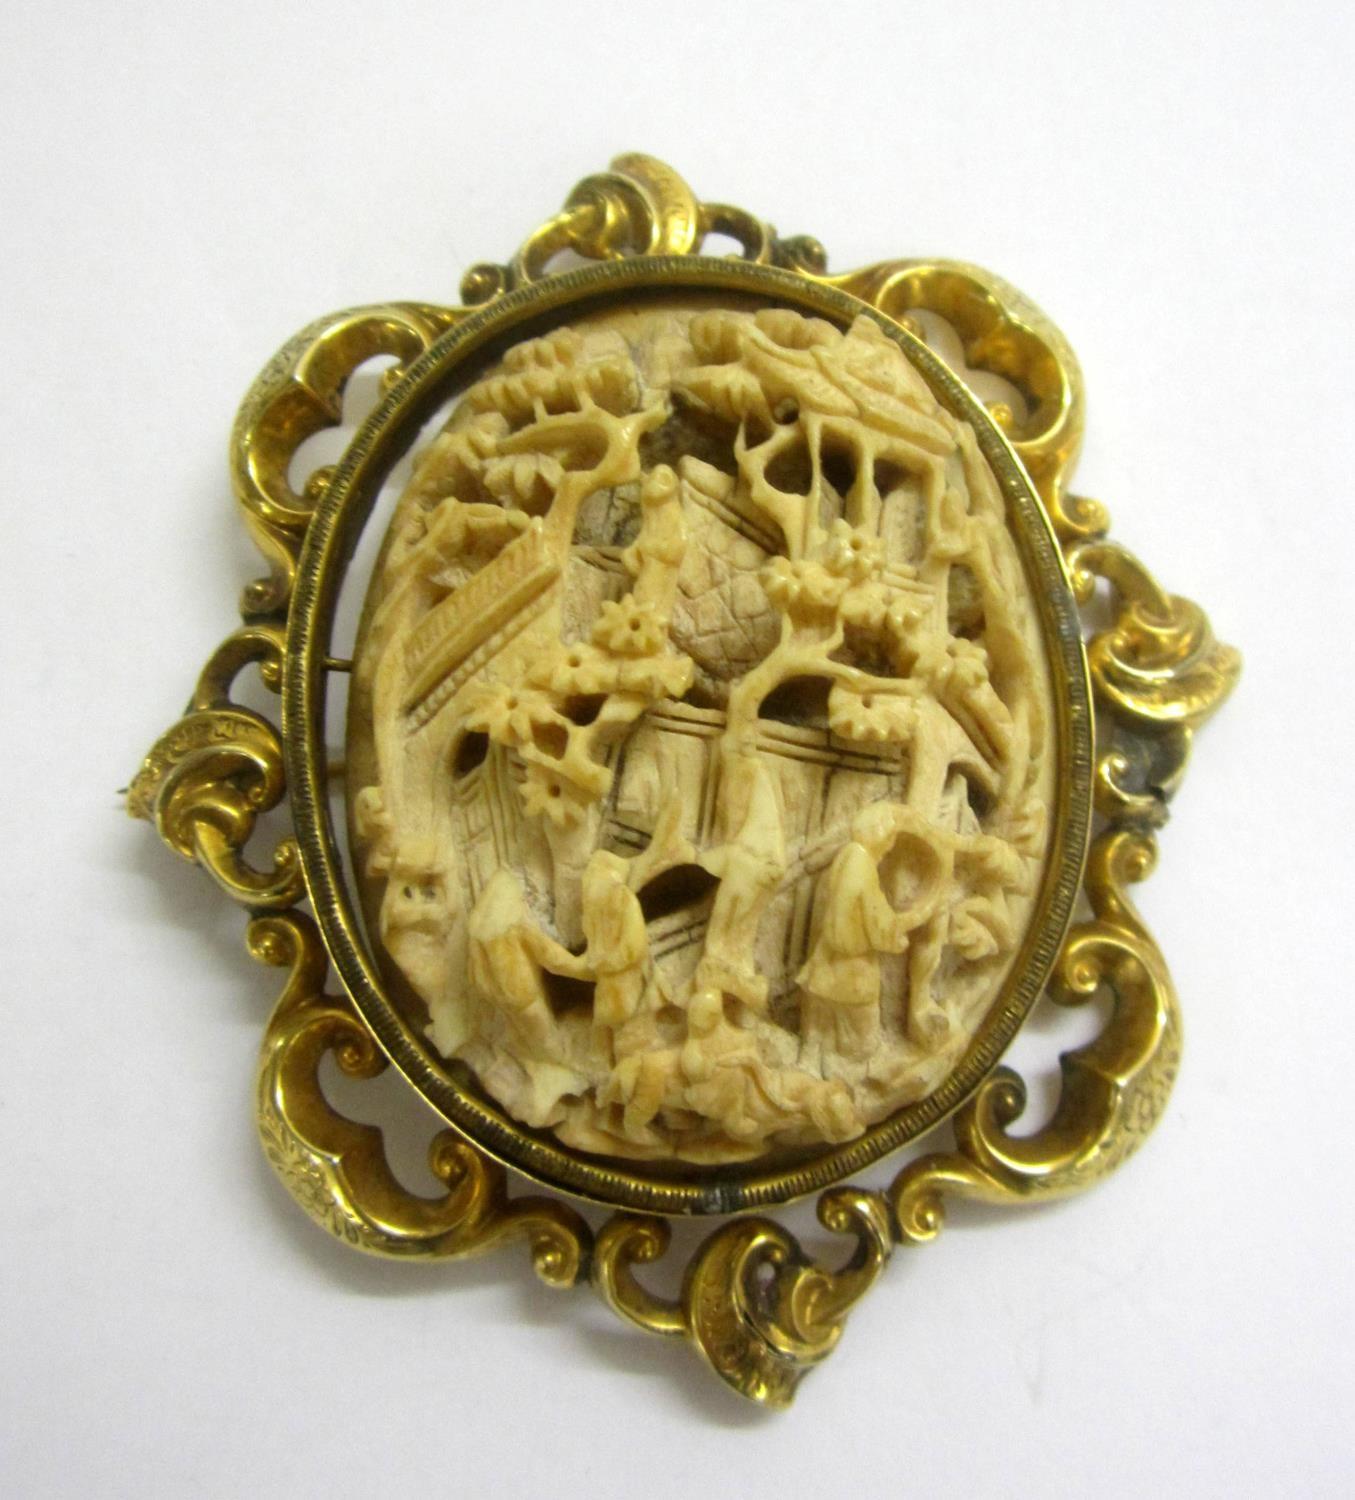 C19th Victorian Chinese (Cantonese) Ivory Carved Brooch, deep relief figures on the veranda,